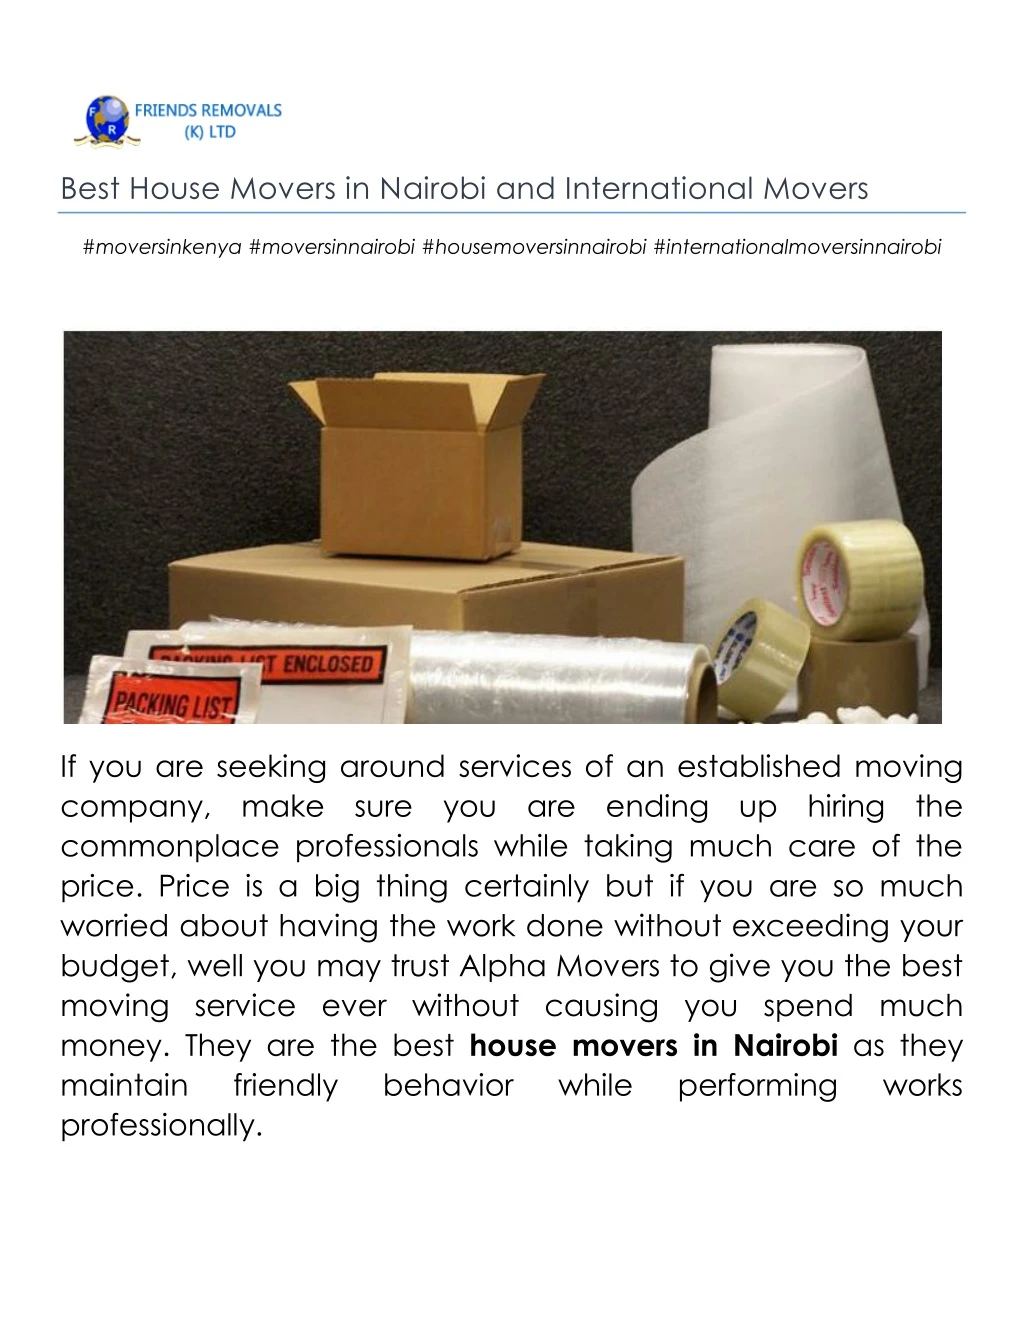 best house movers in nairobi and international